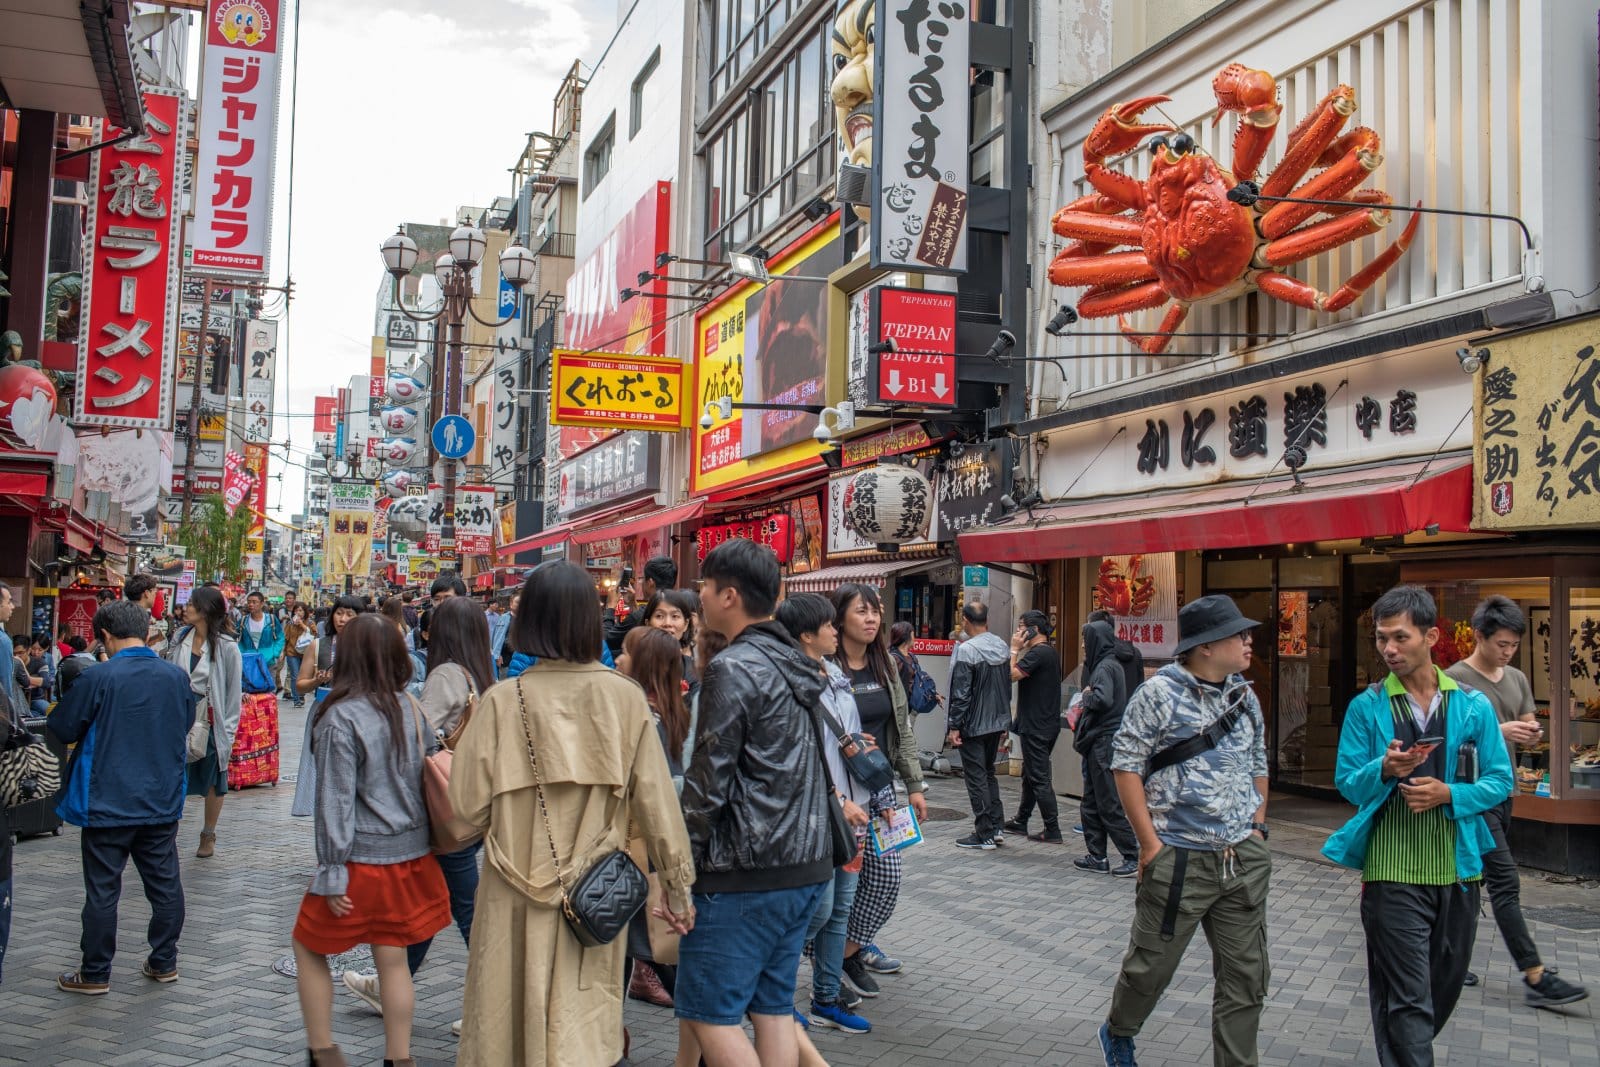 <p class="wp-caption-text">Image Credit: Shutterstock / Michael Gordon</p>  <p>In Japan, where propriety and quietude are cherished, the often loud and boisterous behavior of American visitors disrupts the peace, particularly in sacred places like temples in Kyoto.</p>